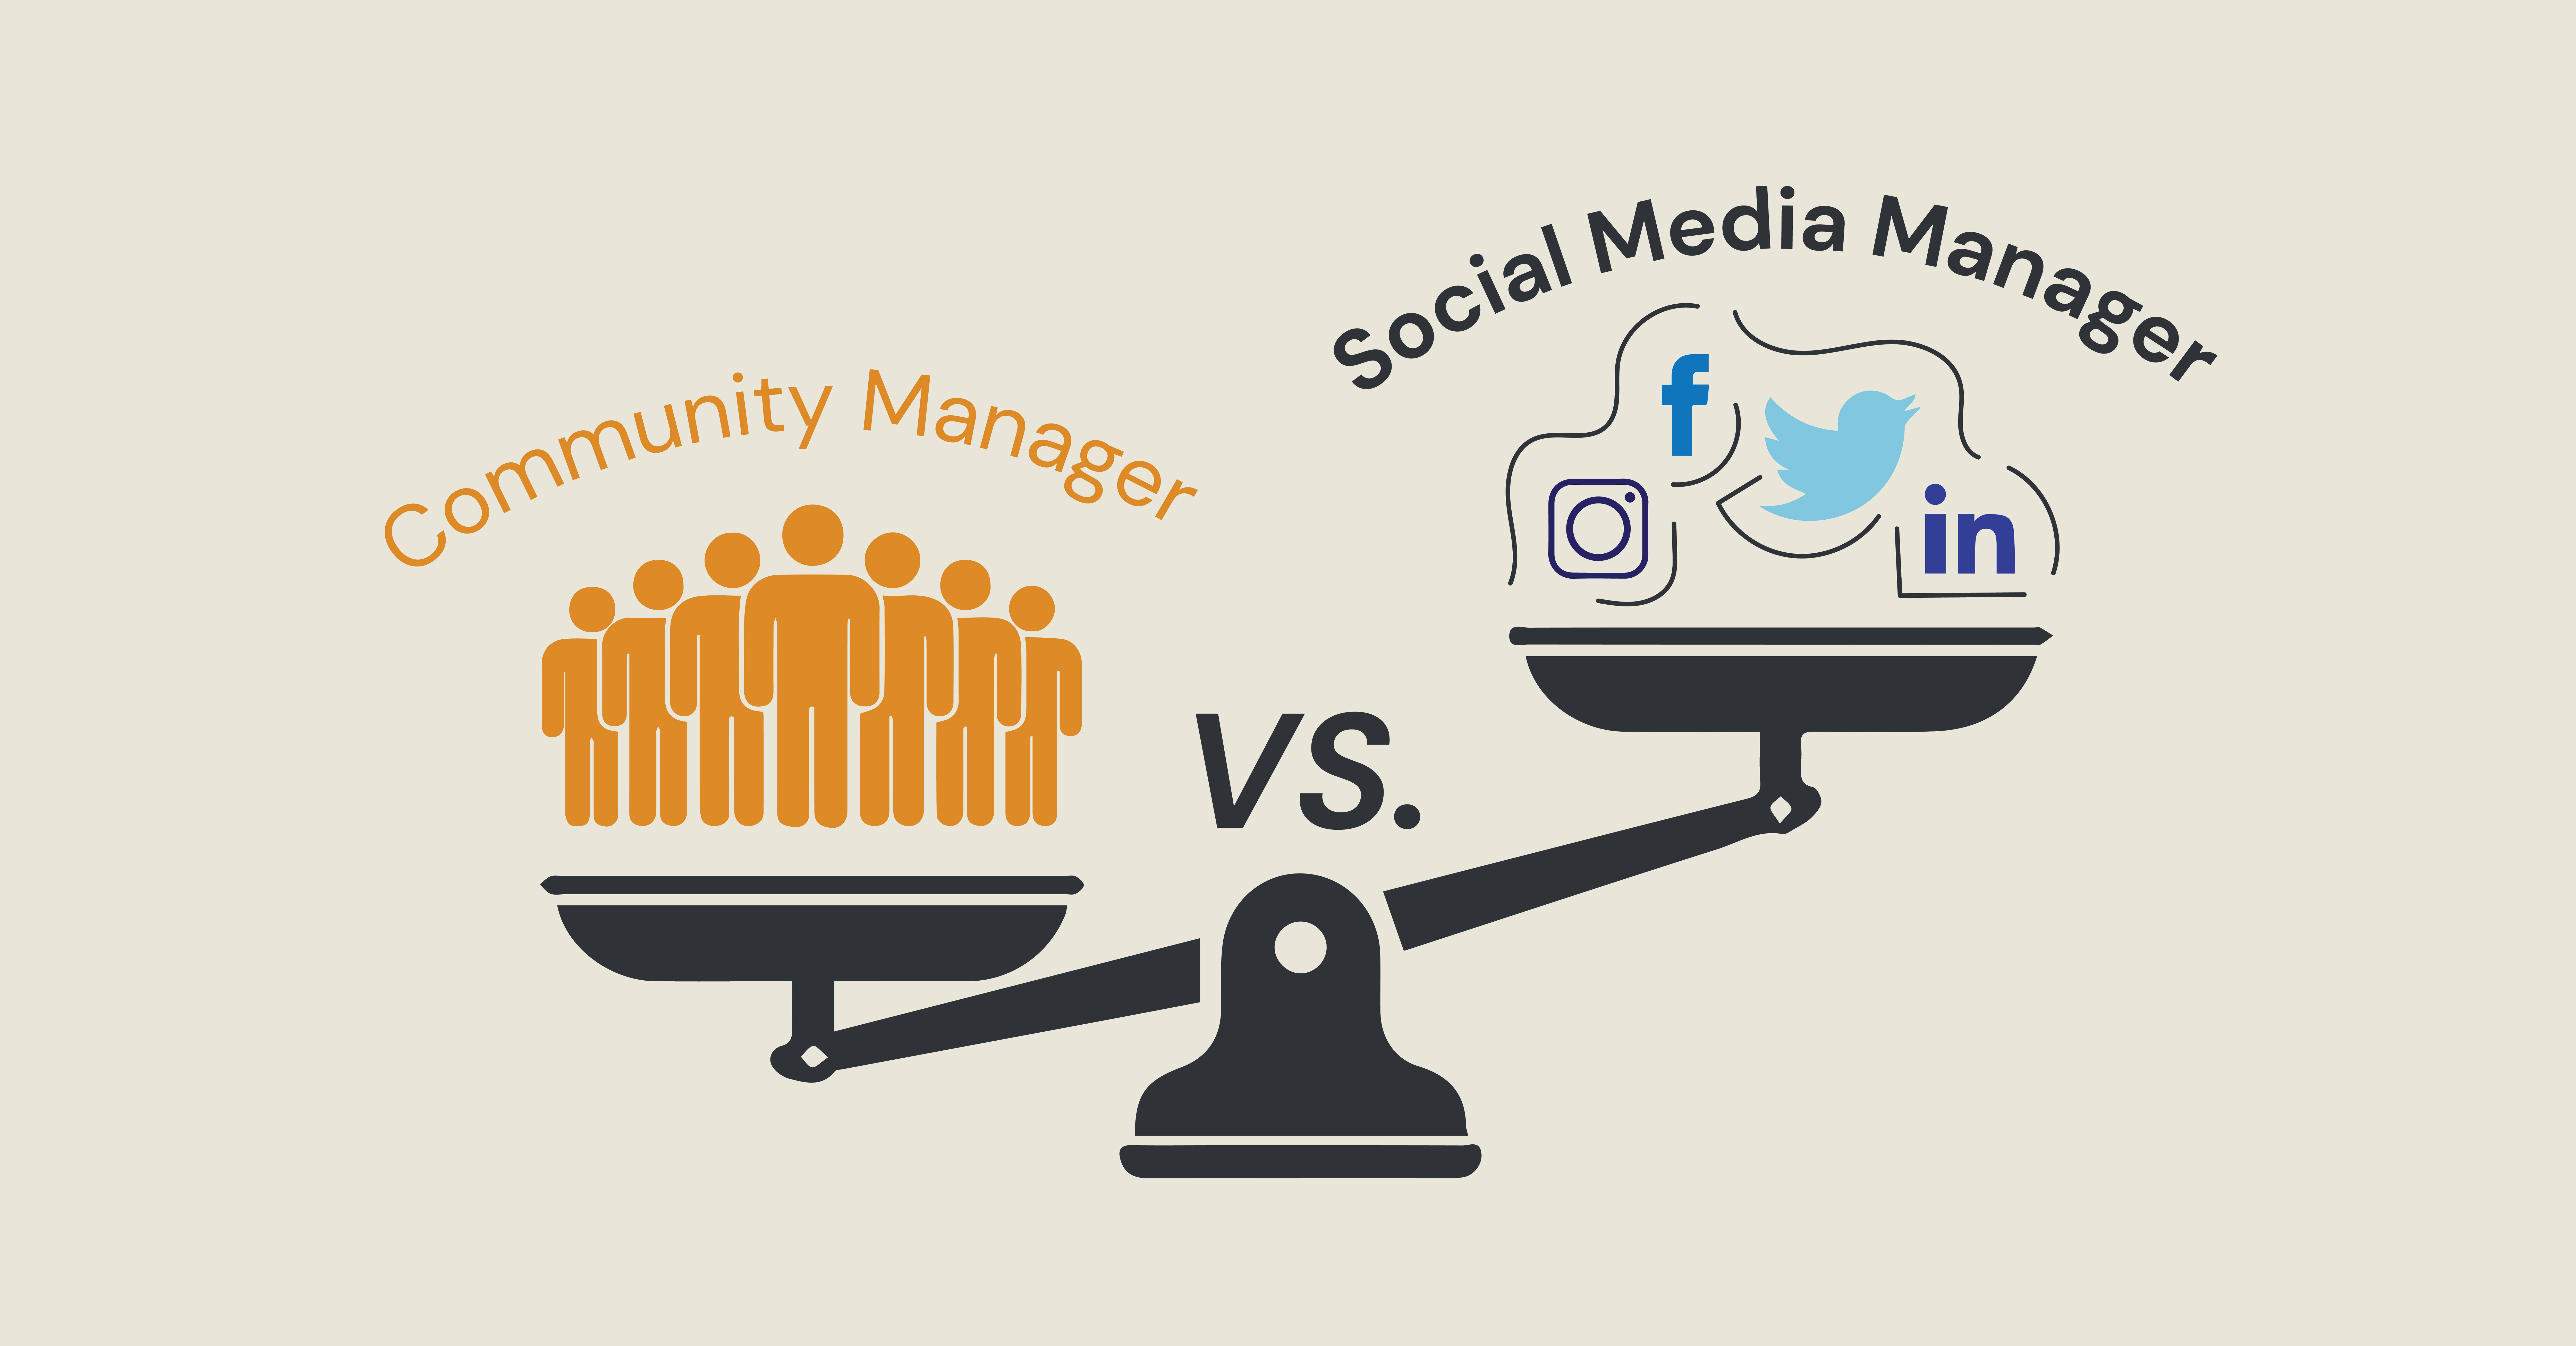 Community Managers Social Media Managers infographics on a weighing scale